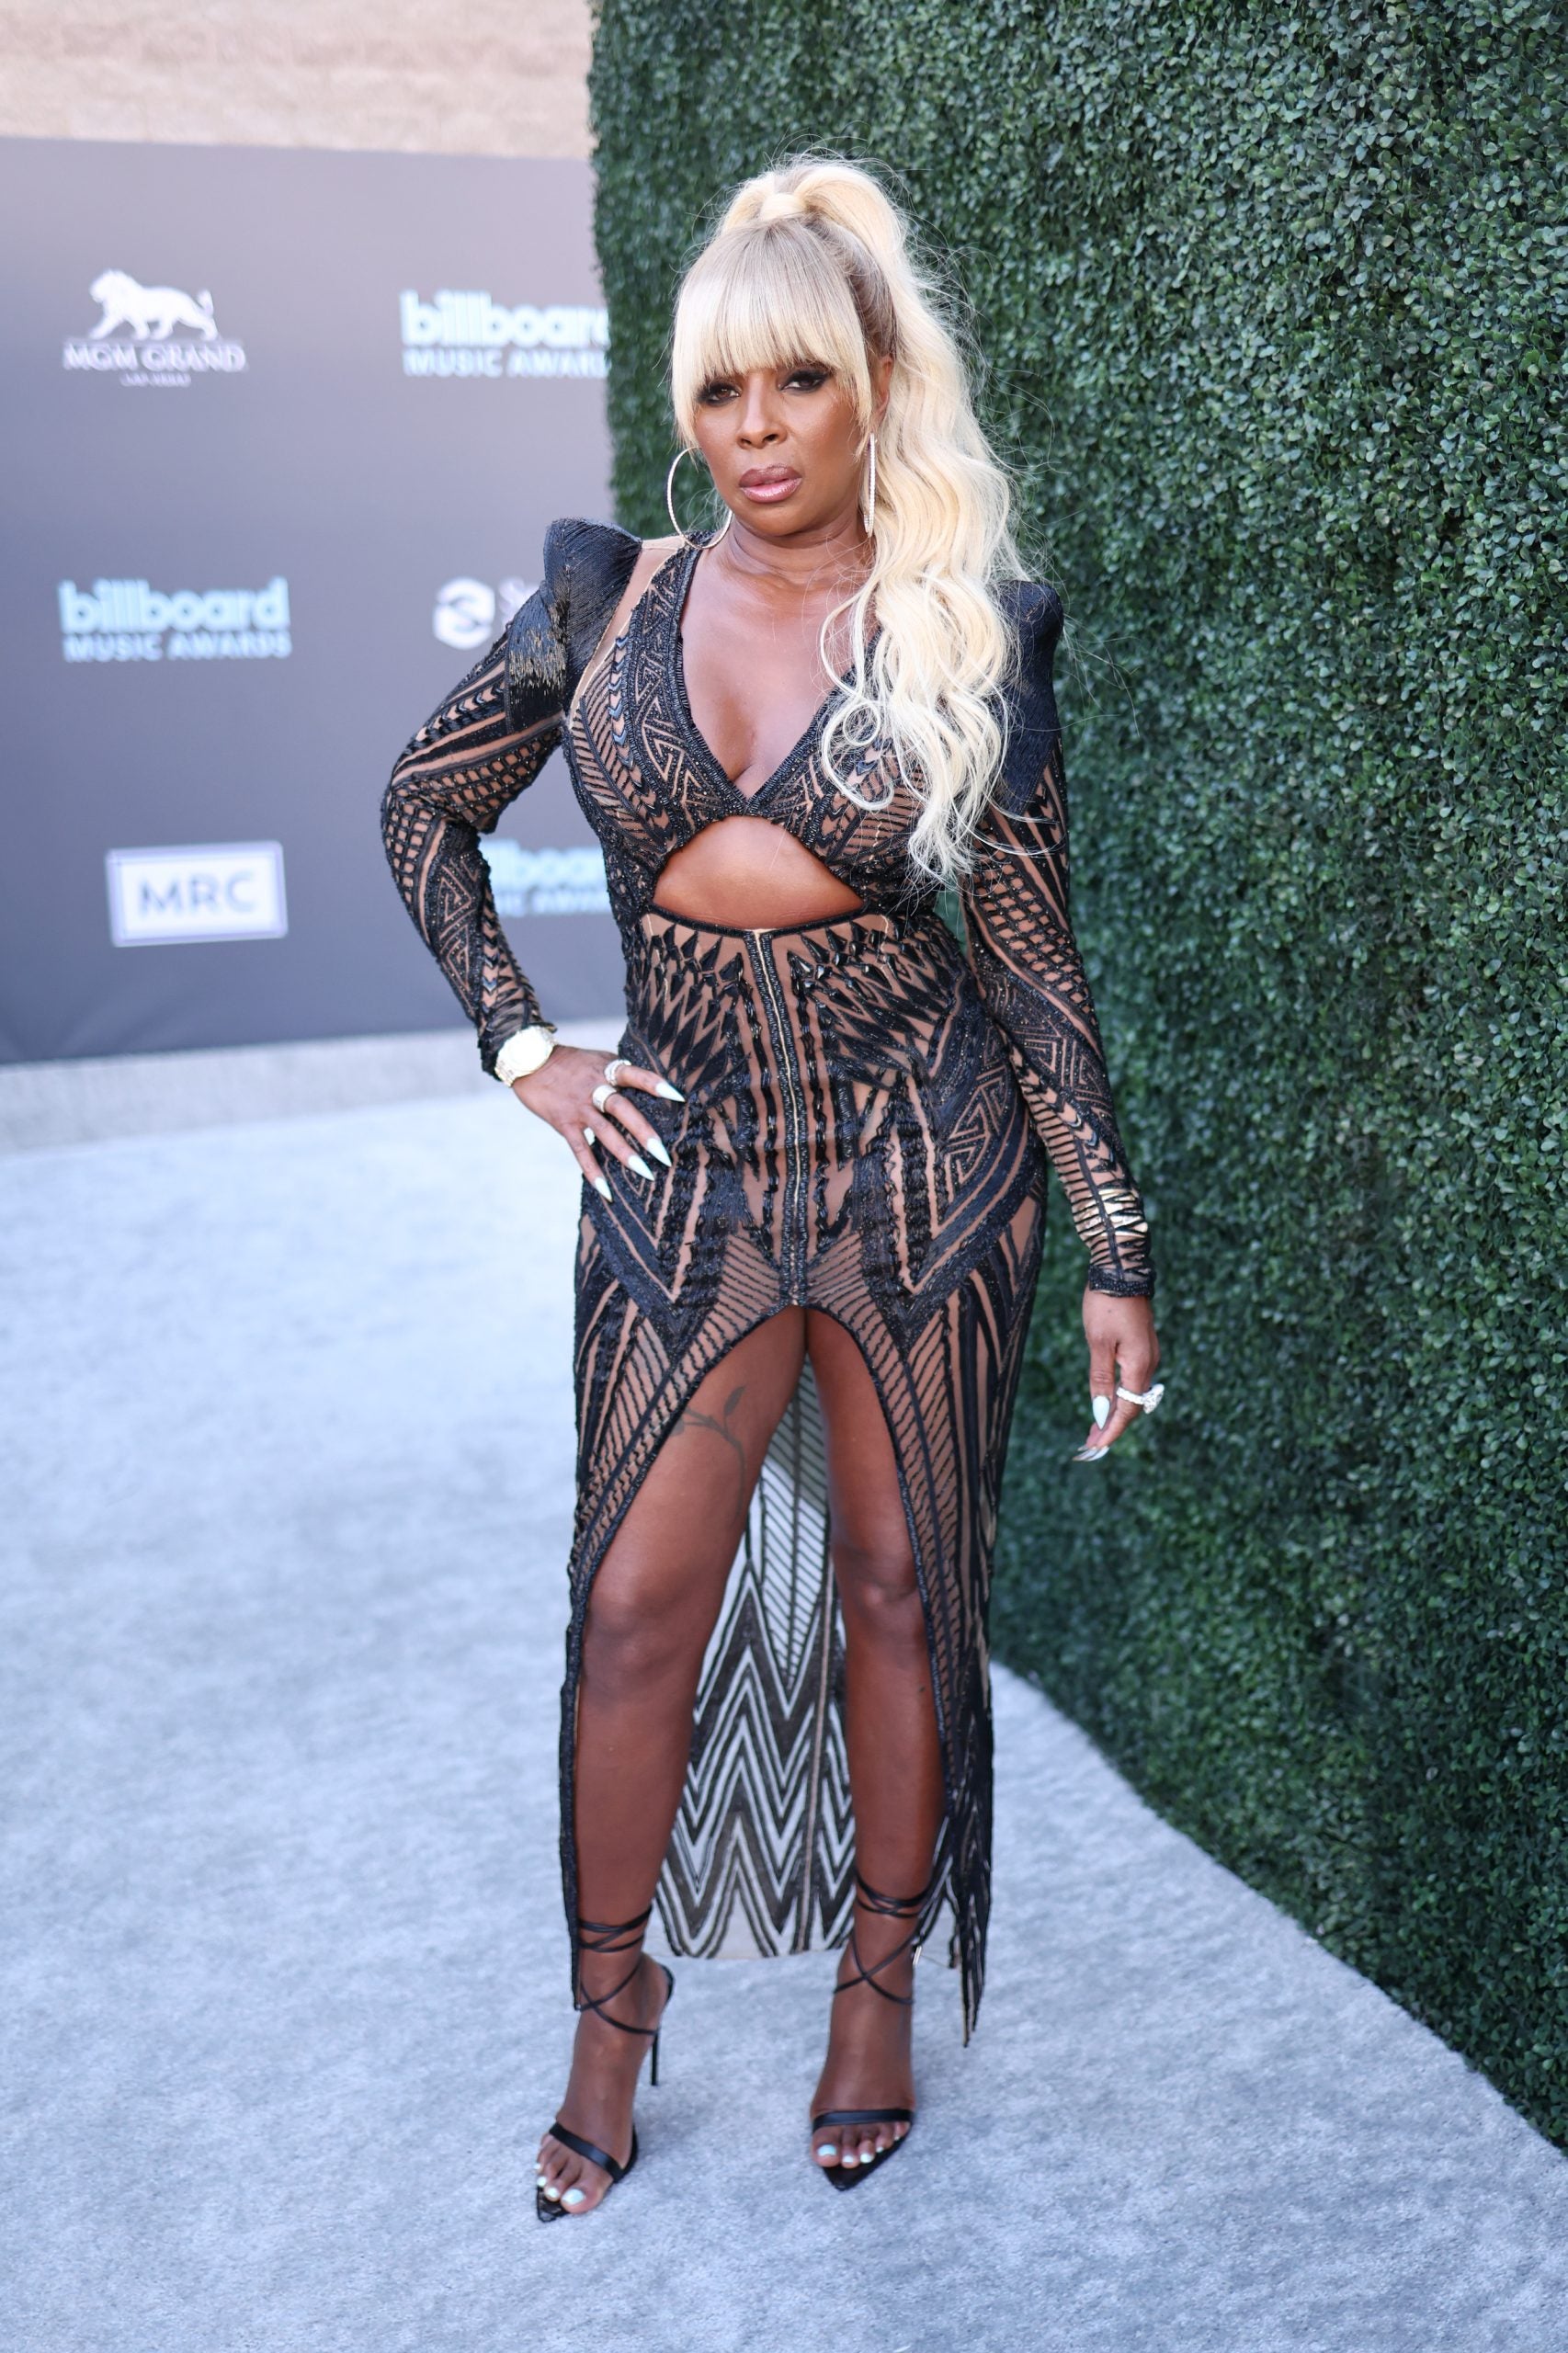 The Fashions Didn't Disappoint At The 2022 Billboard Awards